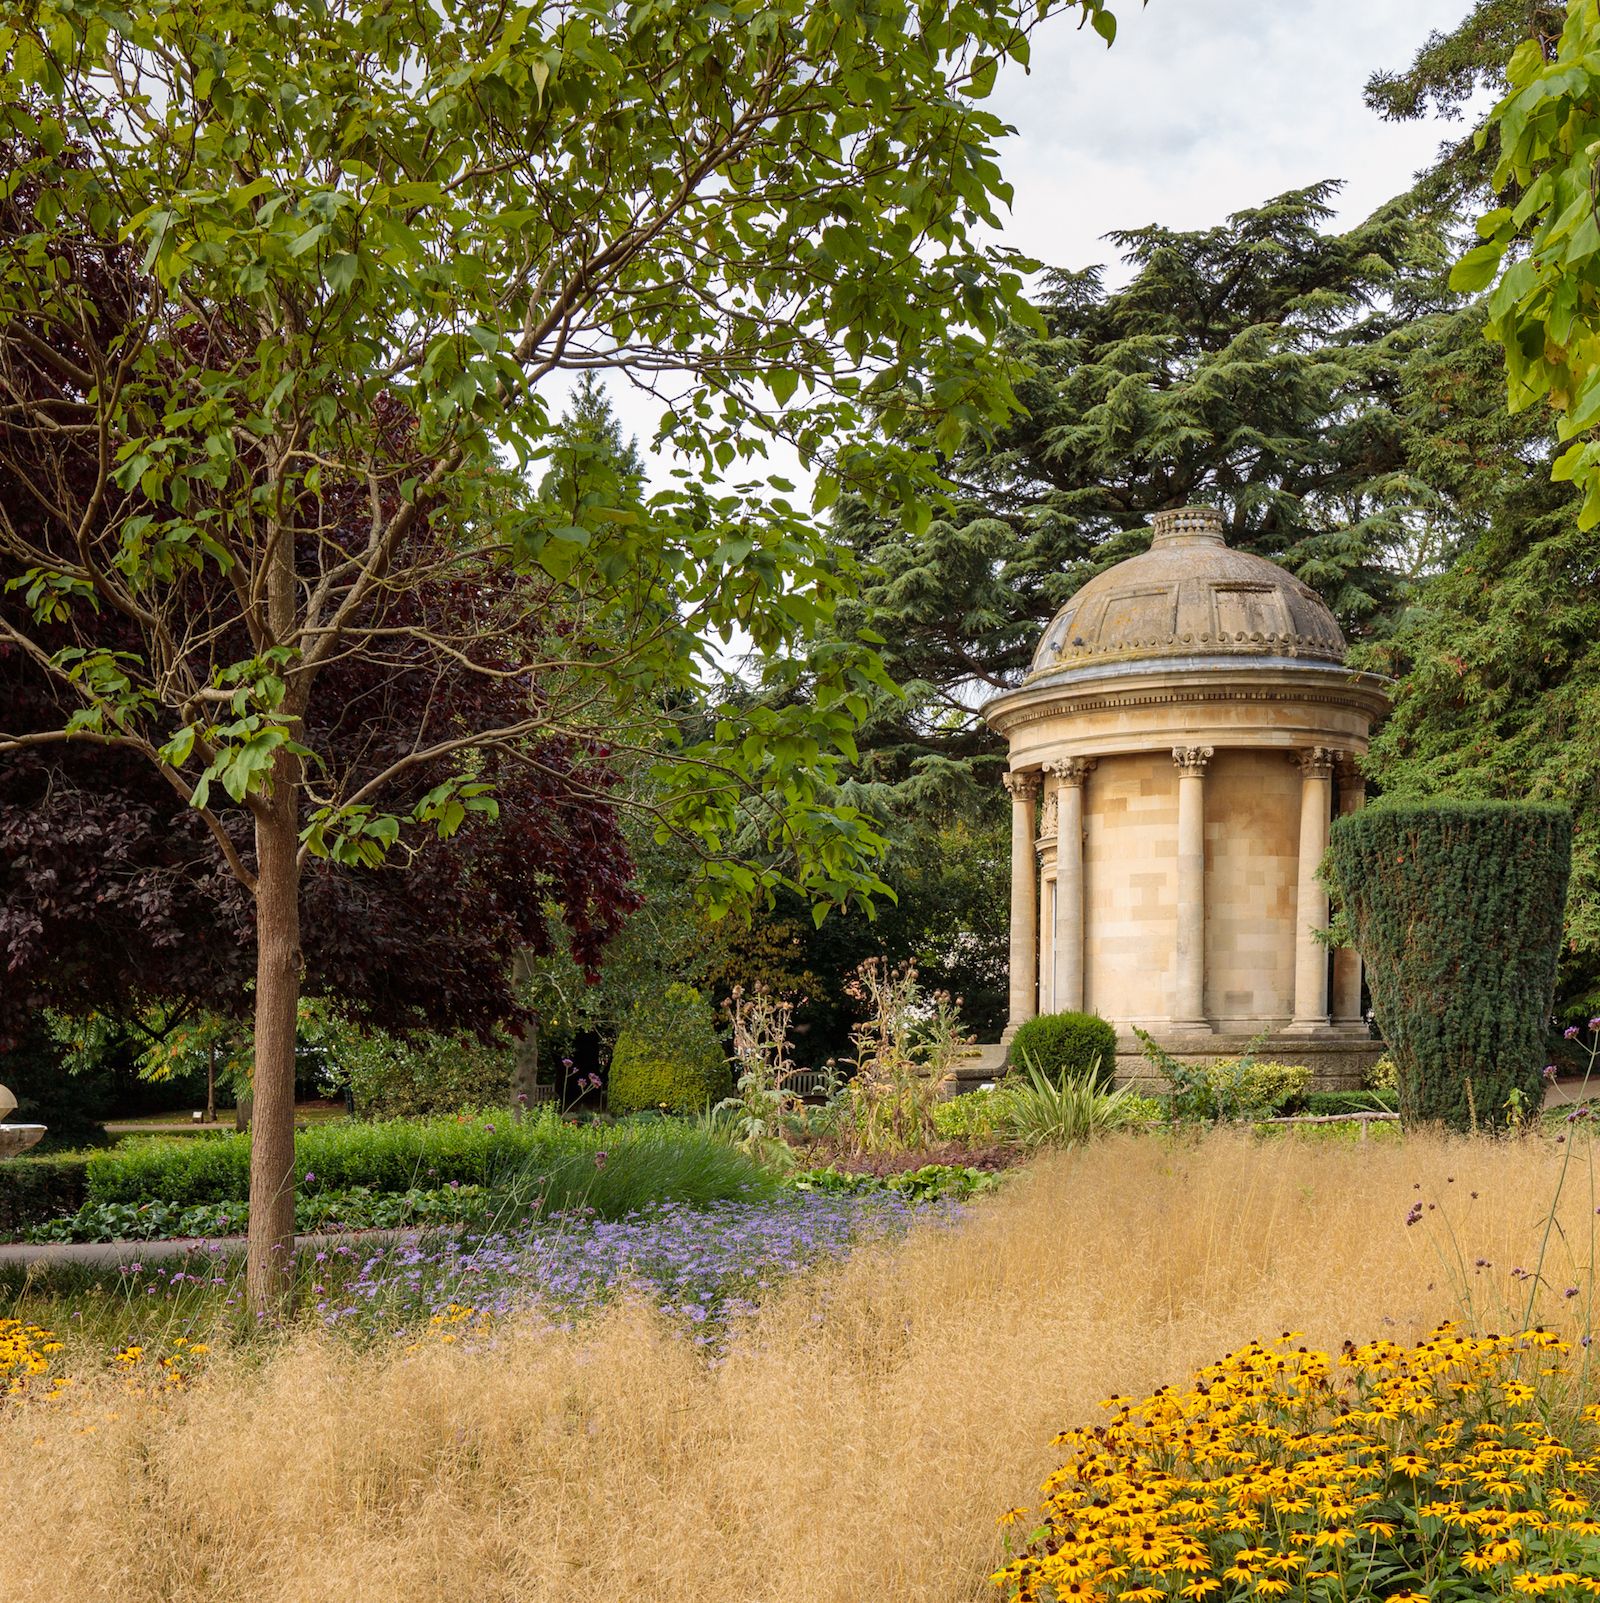 How the Garden Folly Became the Most Whimsical Accessory in English Gardens